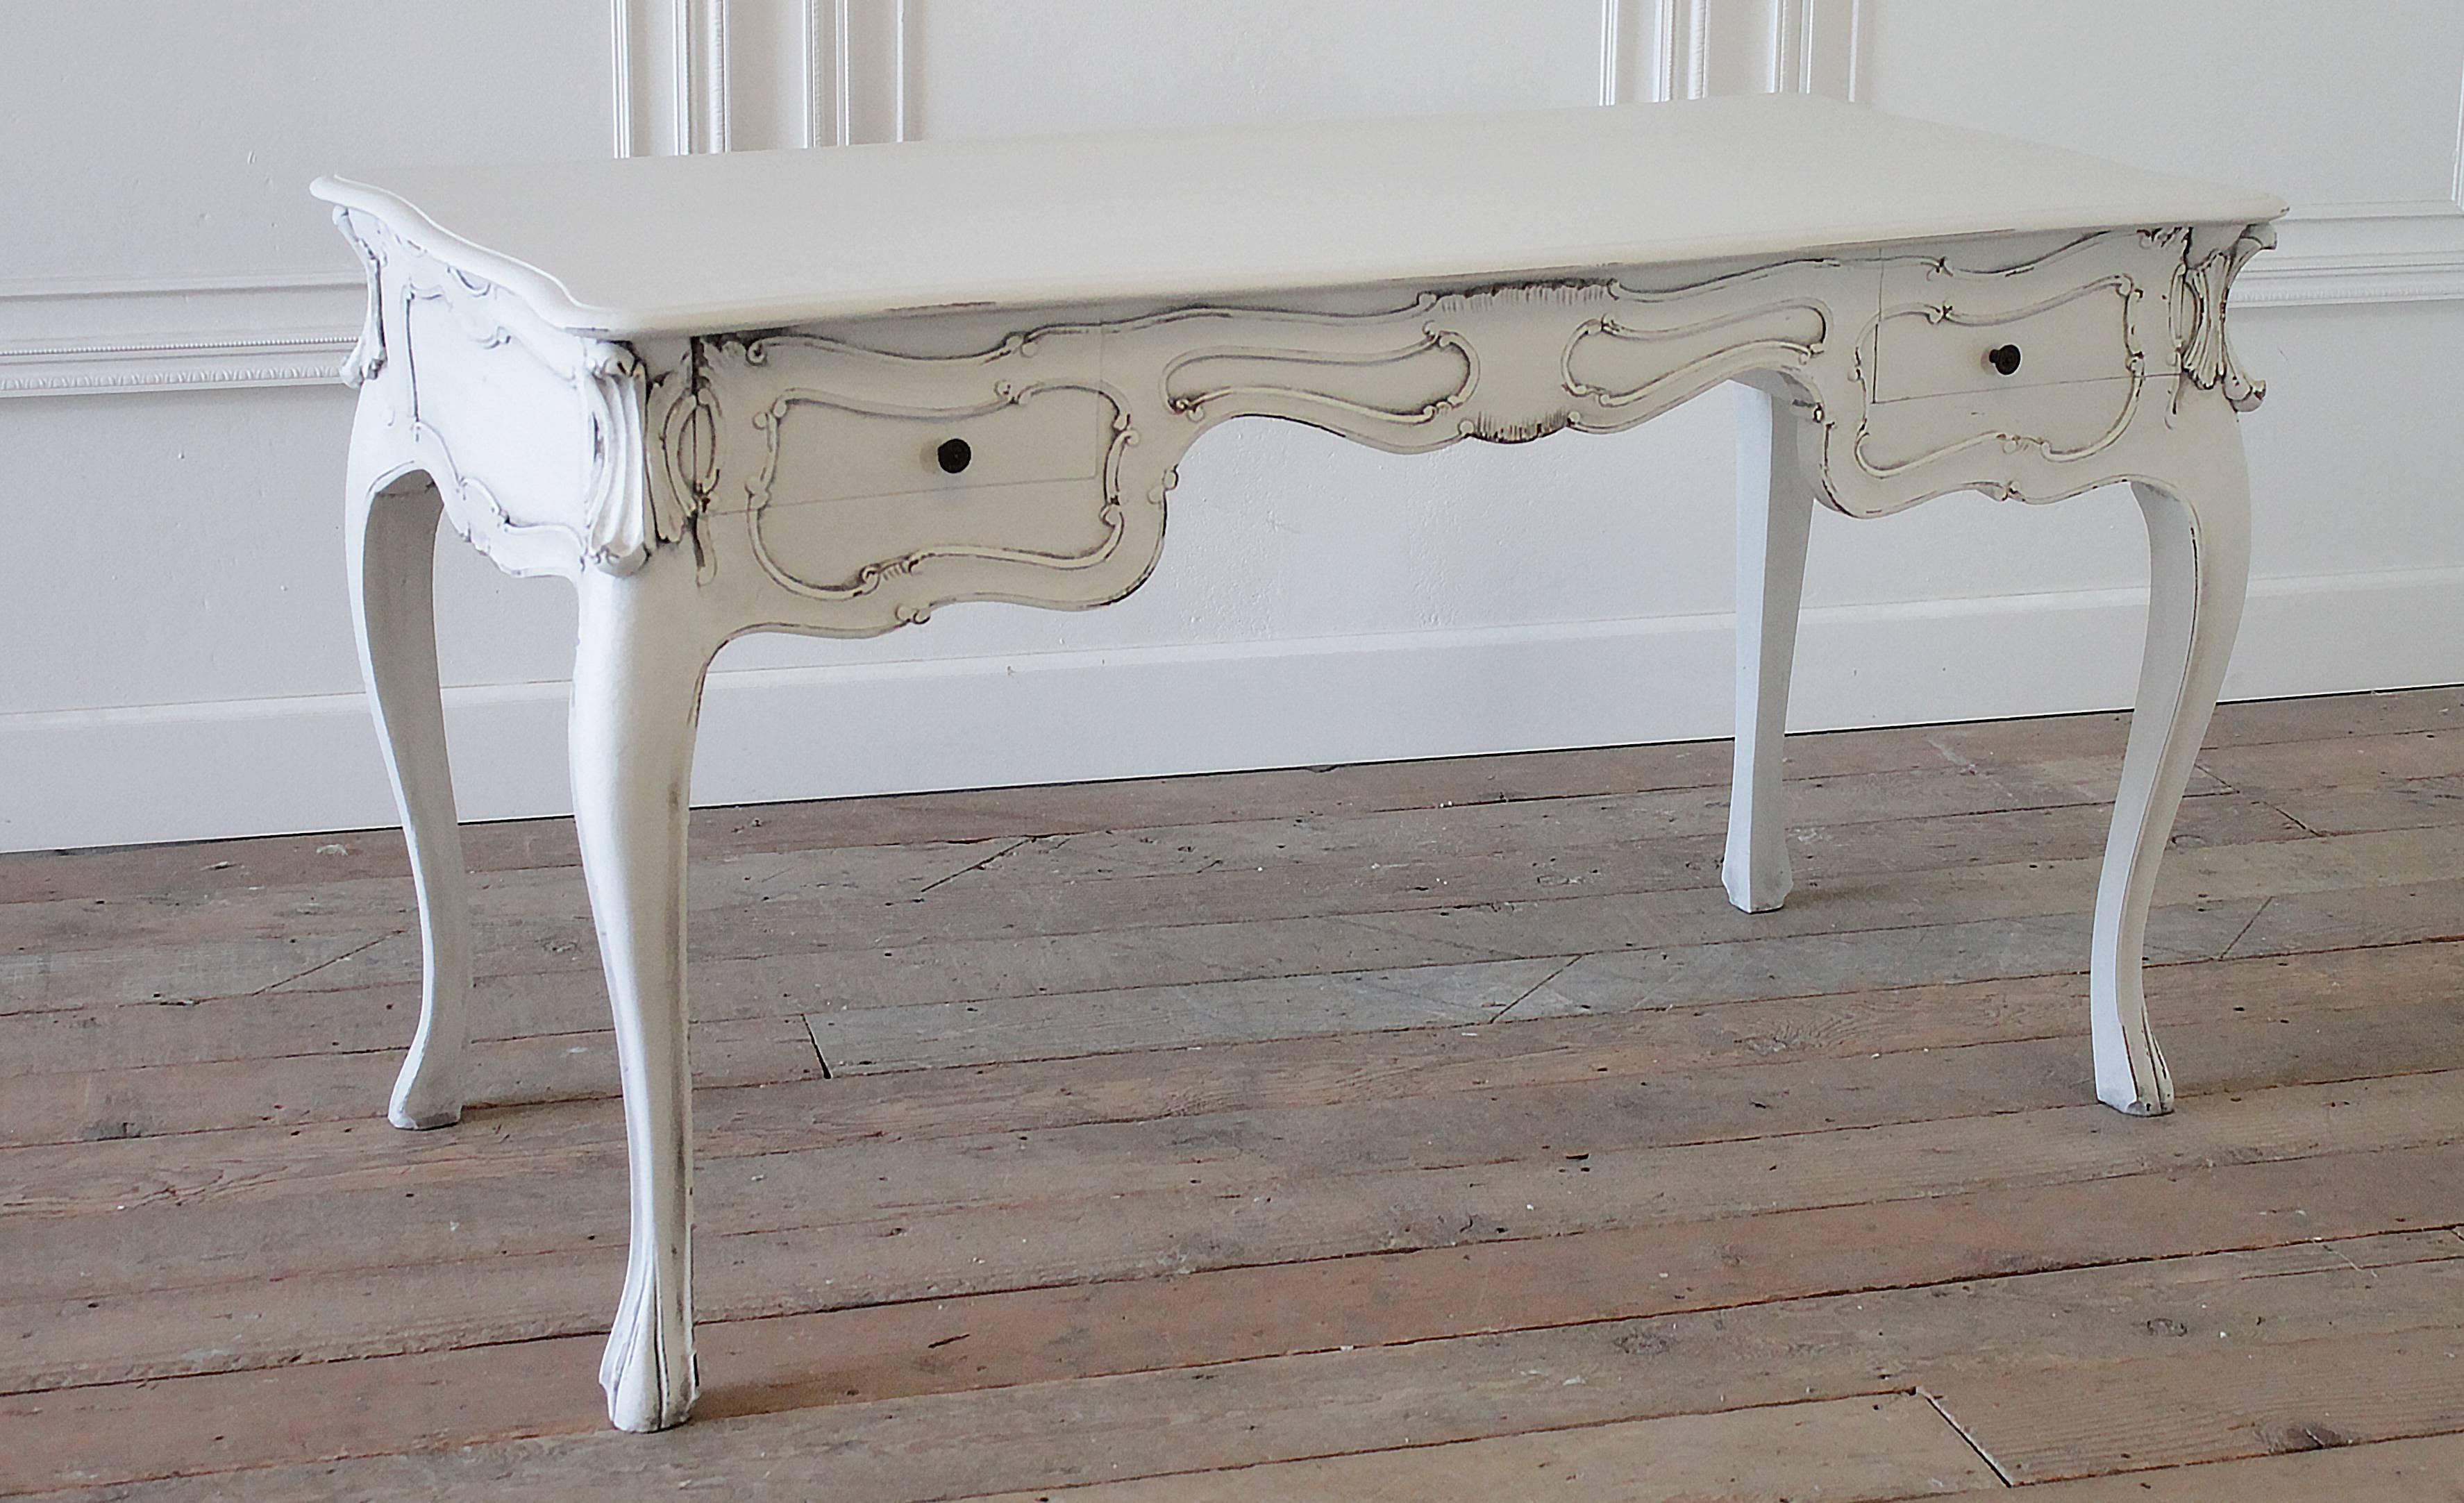 Beautiful Louis XV style bureau plat with two drawers. Perfect desk for your office, or use as a vanity. Painted in a soft oyster white with a subtle distressed and antique glaze finish. This gives the look of a beautiful aged finish. The two